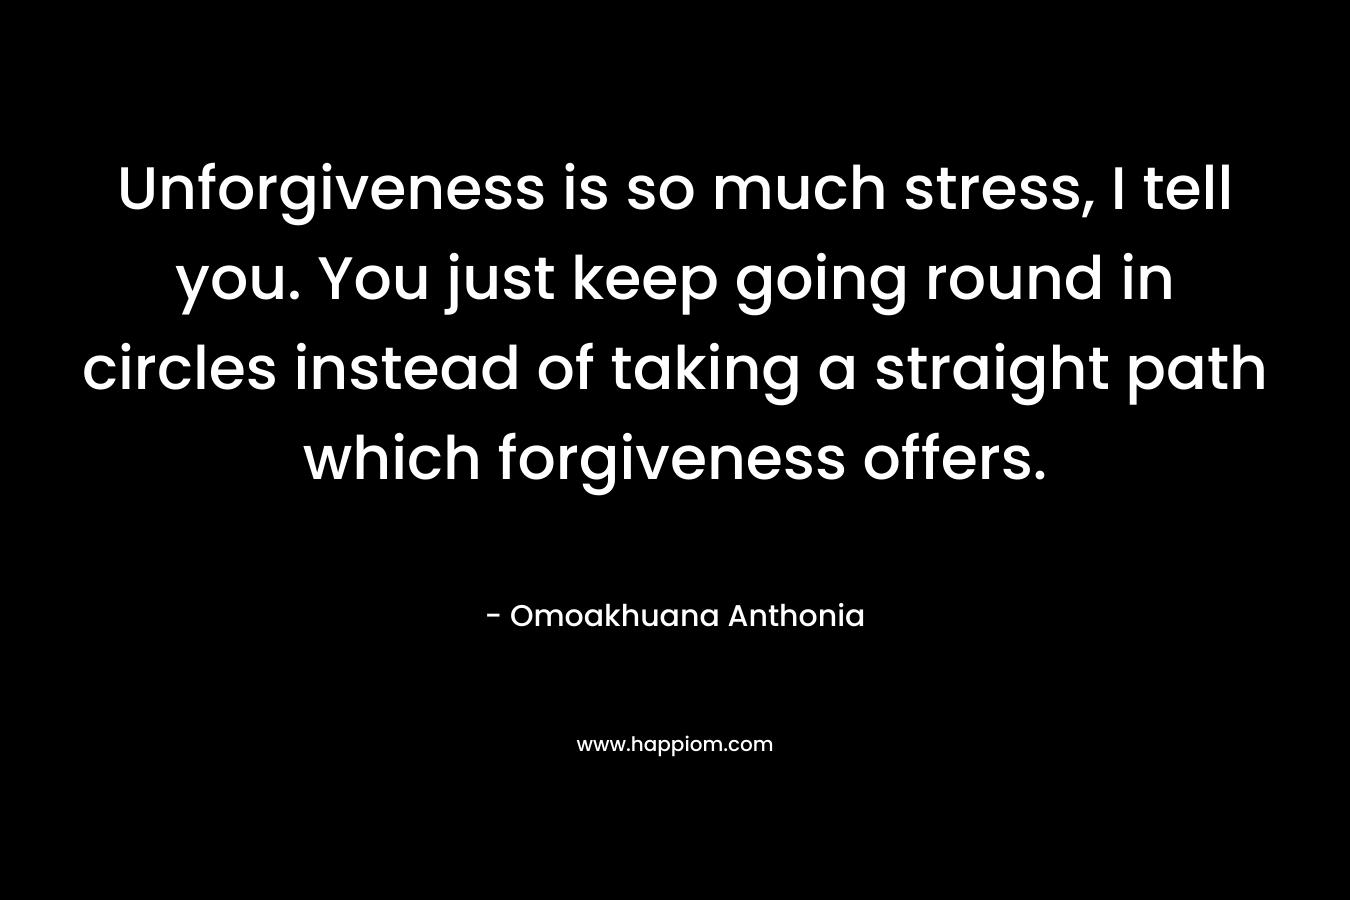 Unforgiveness is so much stress, I tell you. You just keep going round in circles instead of taking a straight path which forgiveness offers. – Omoakhuana Anthonia